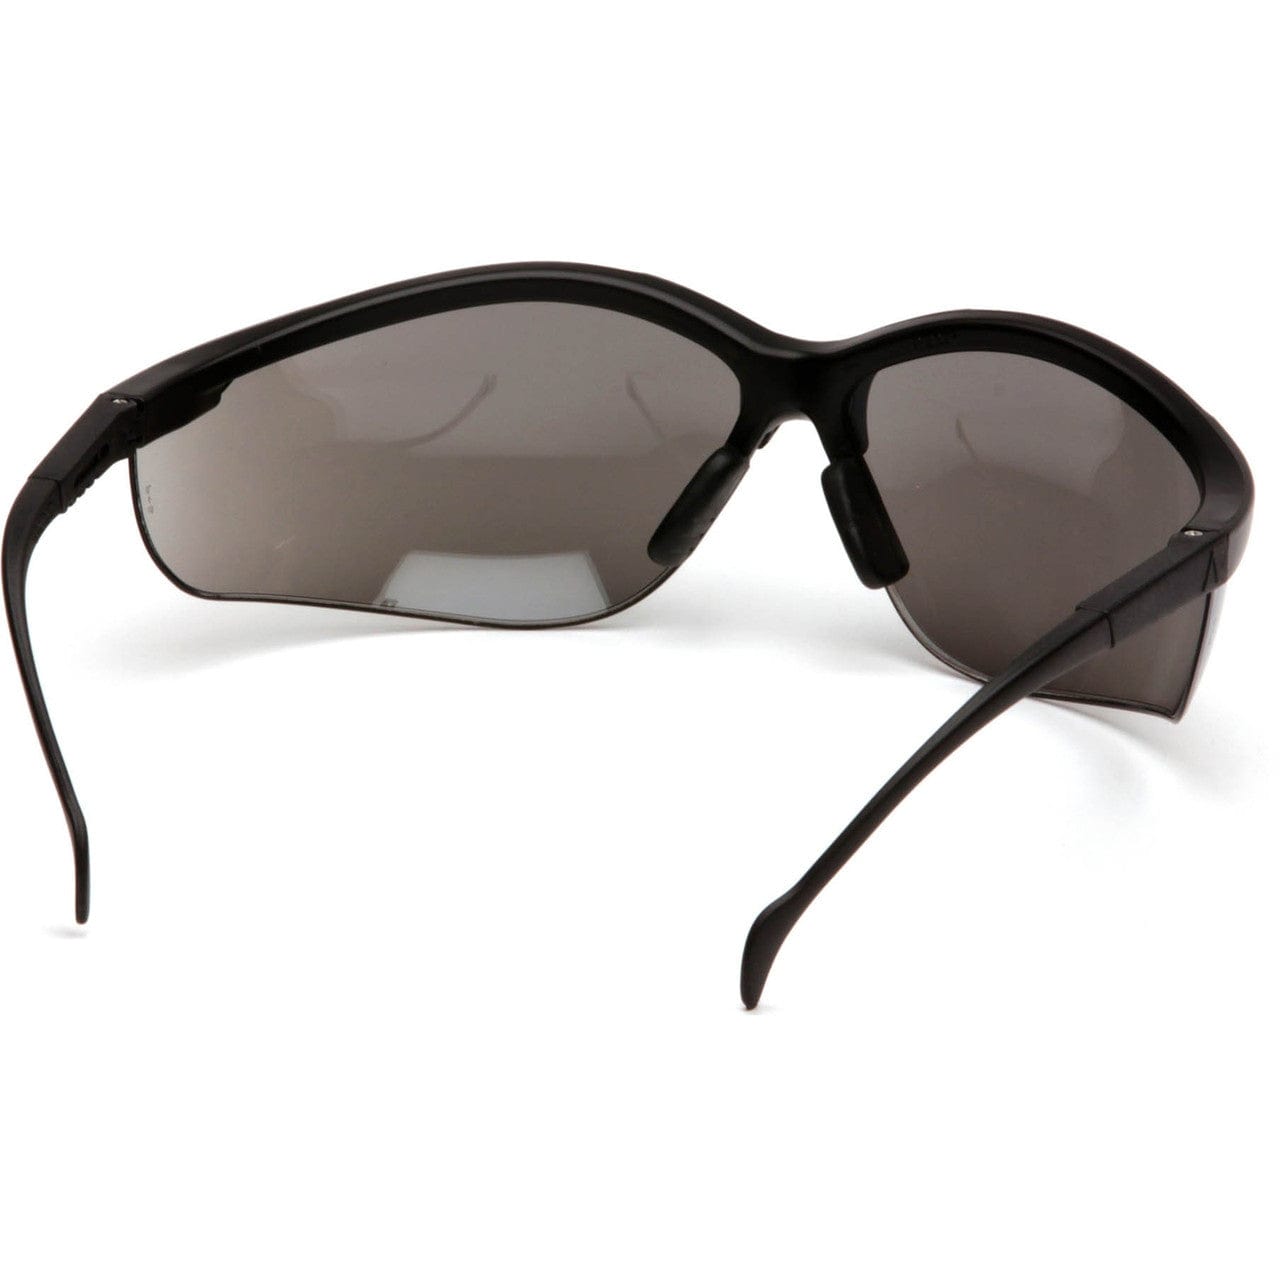 Pyramex Venture 2 Safety Glasses with Black Frame and Silver Mirror Lens SB1870S Inside View